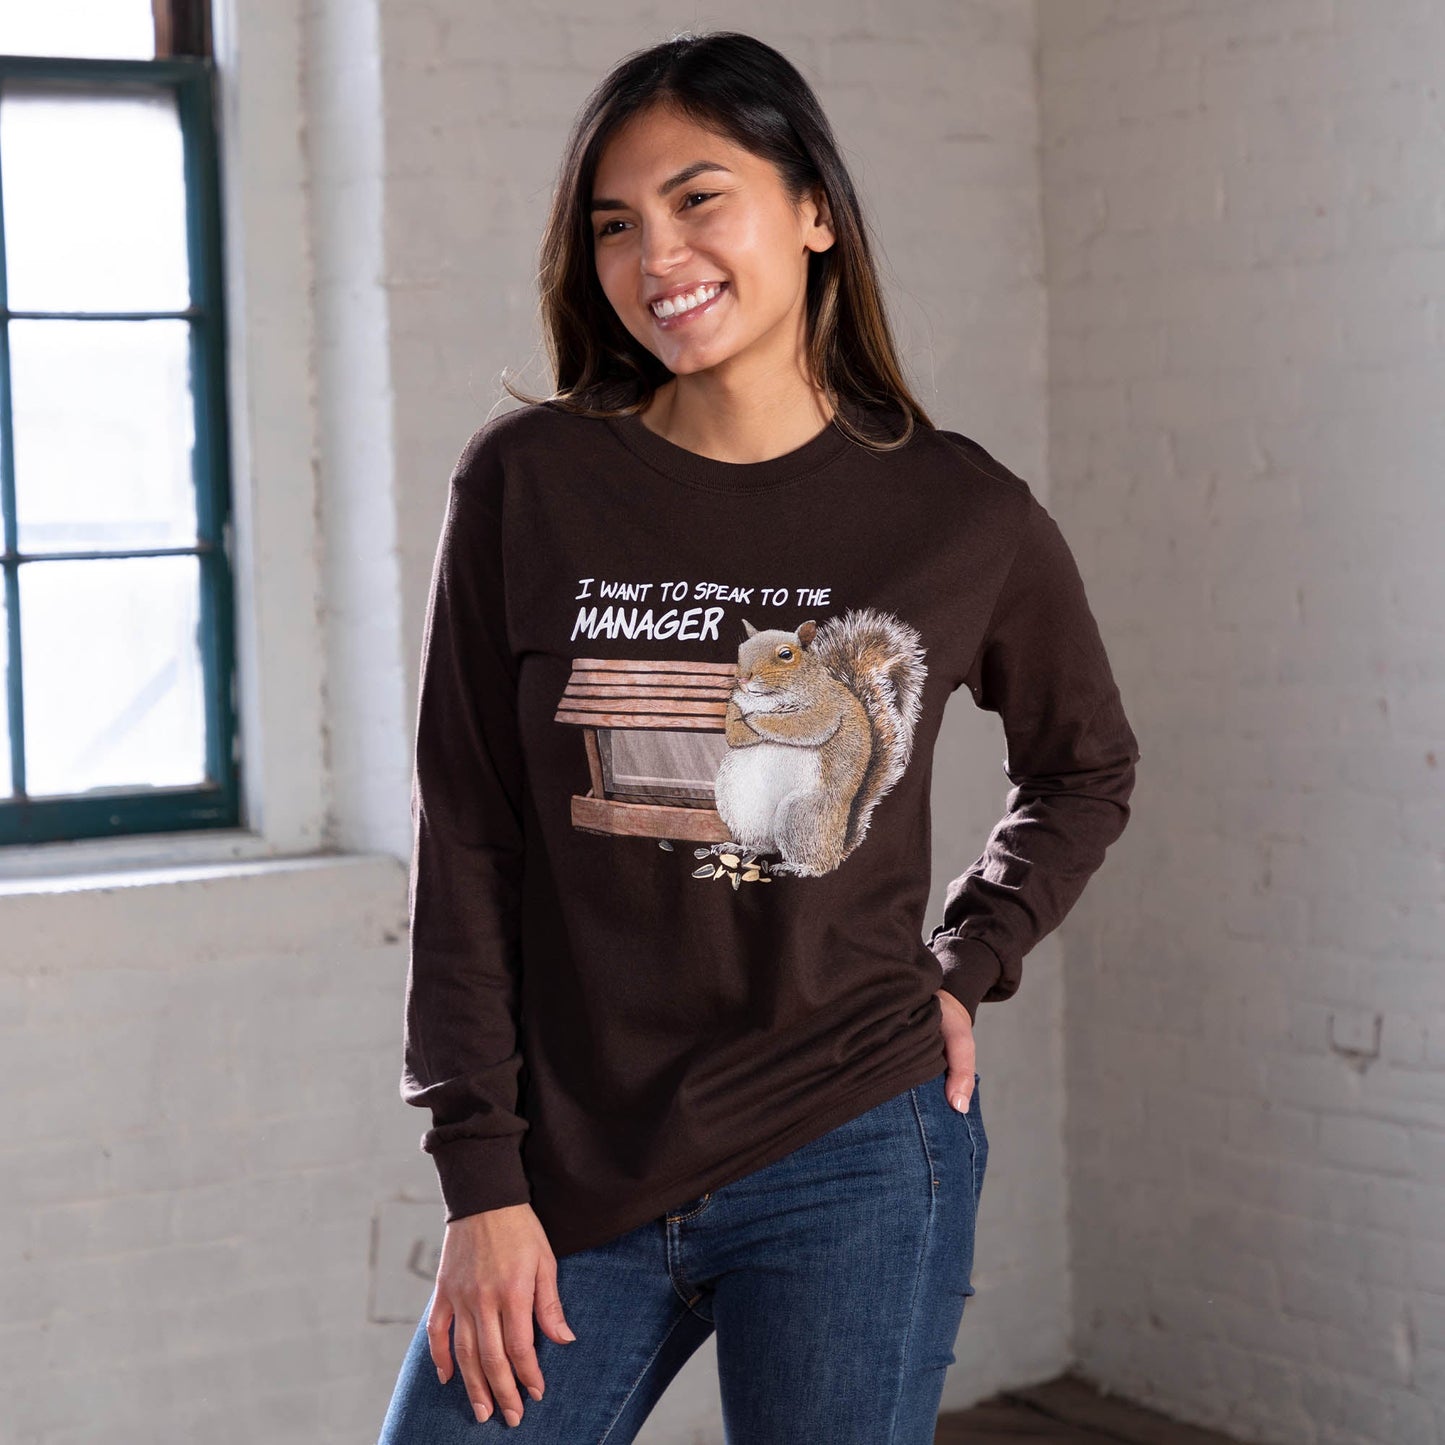 Speak to the Manager Long Sleeve T-Shirt